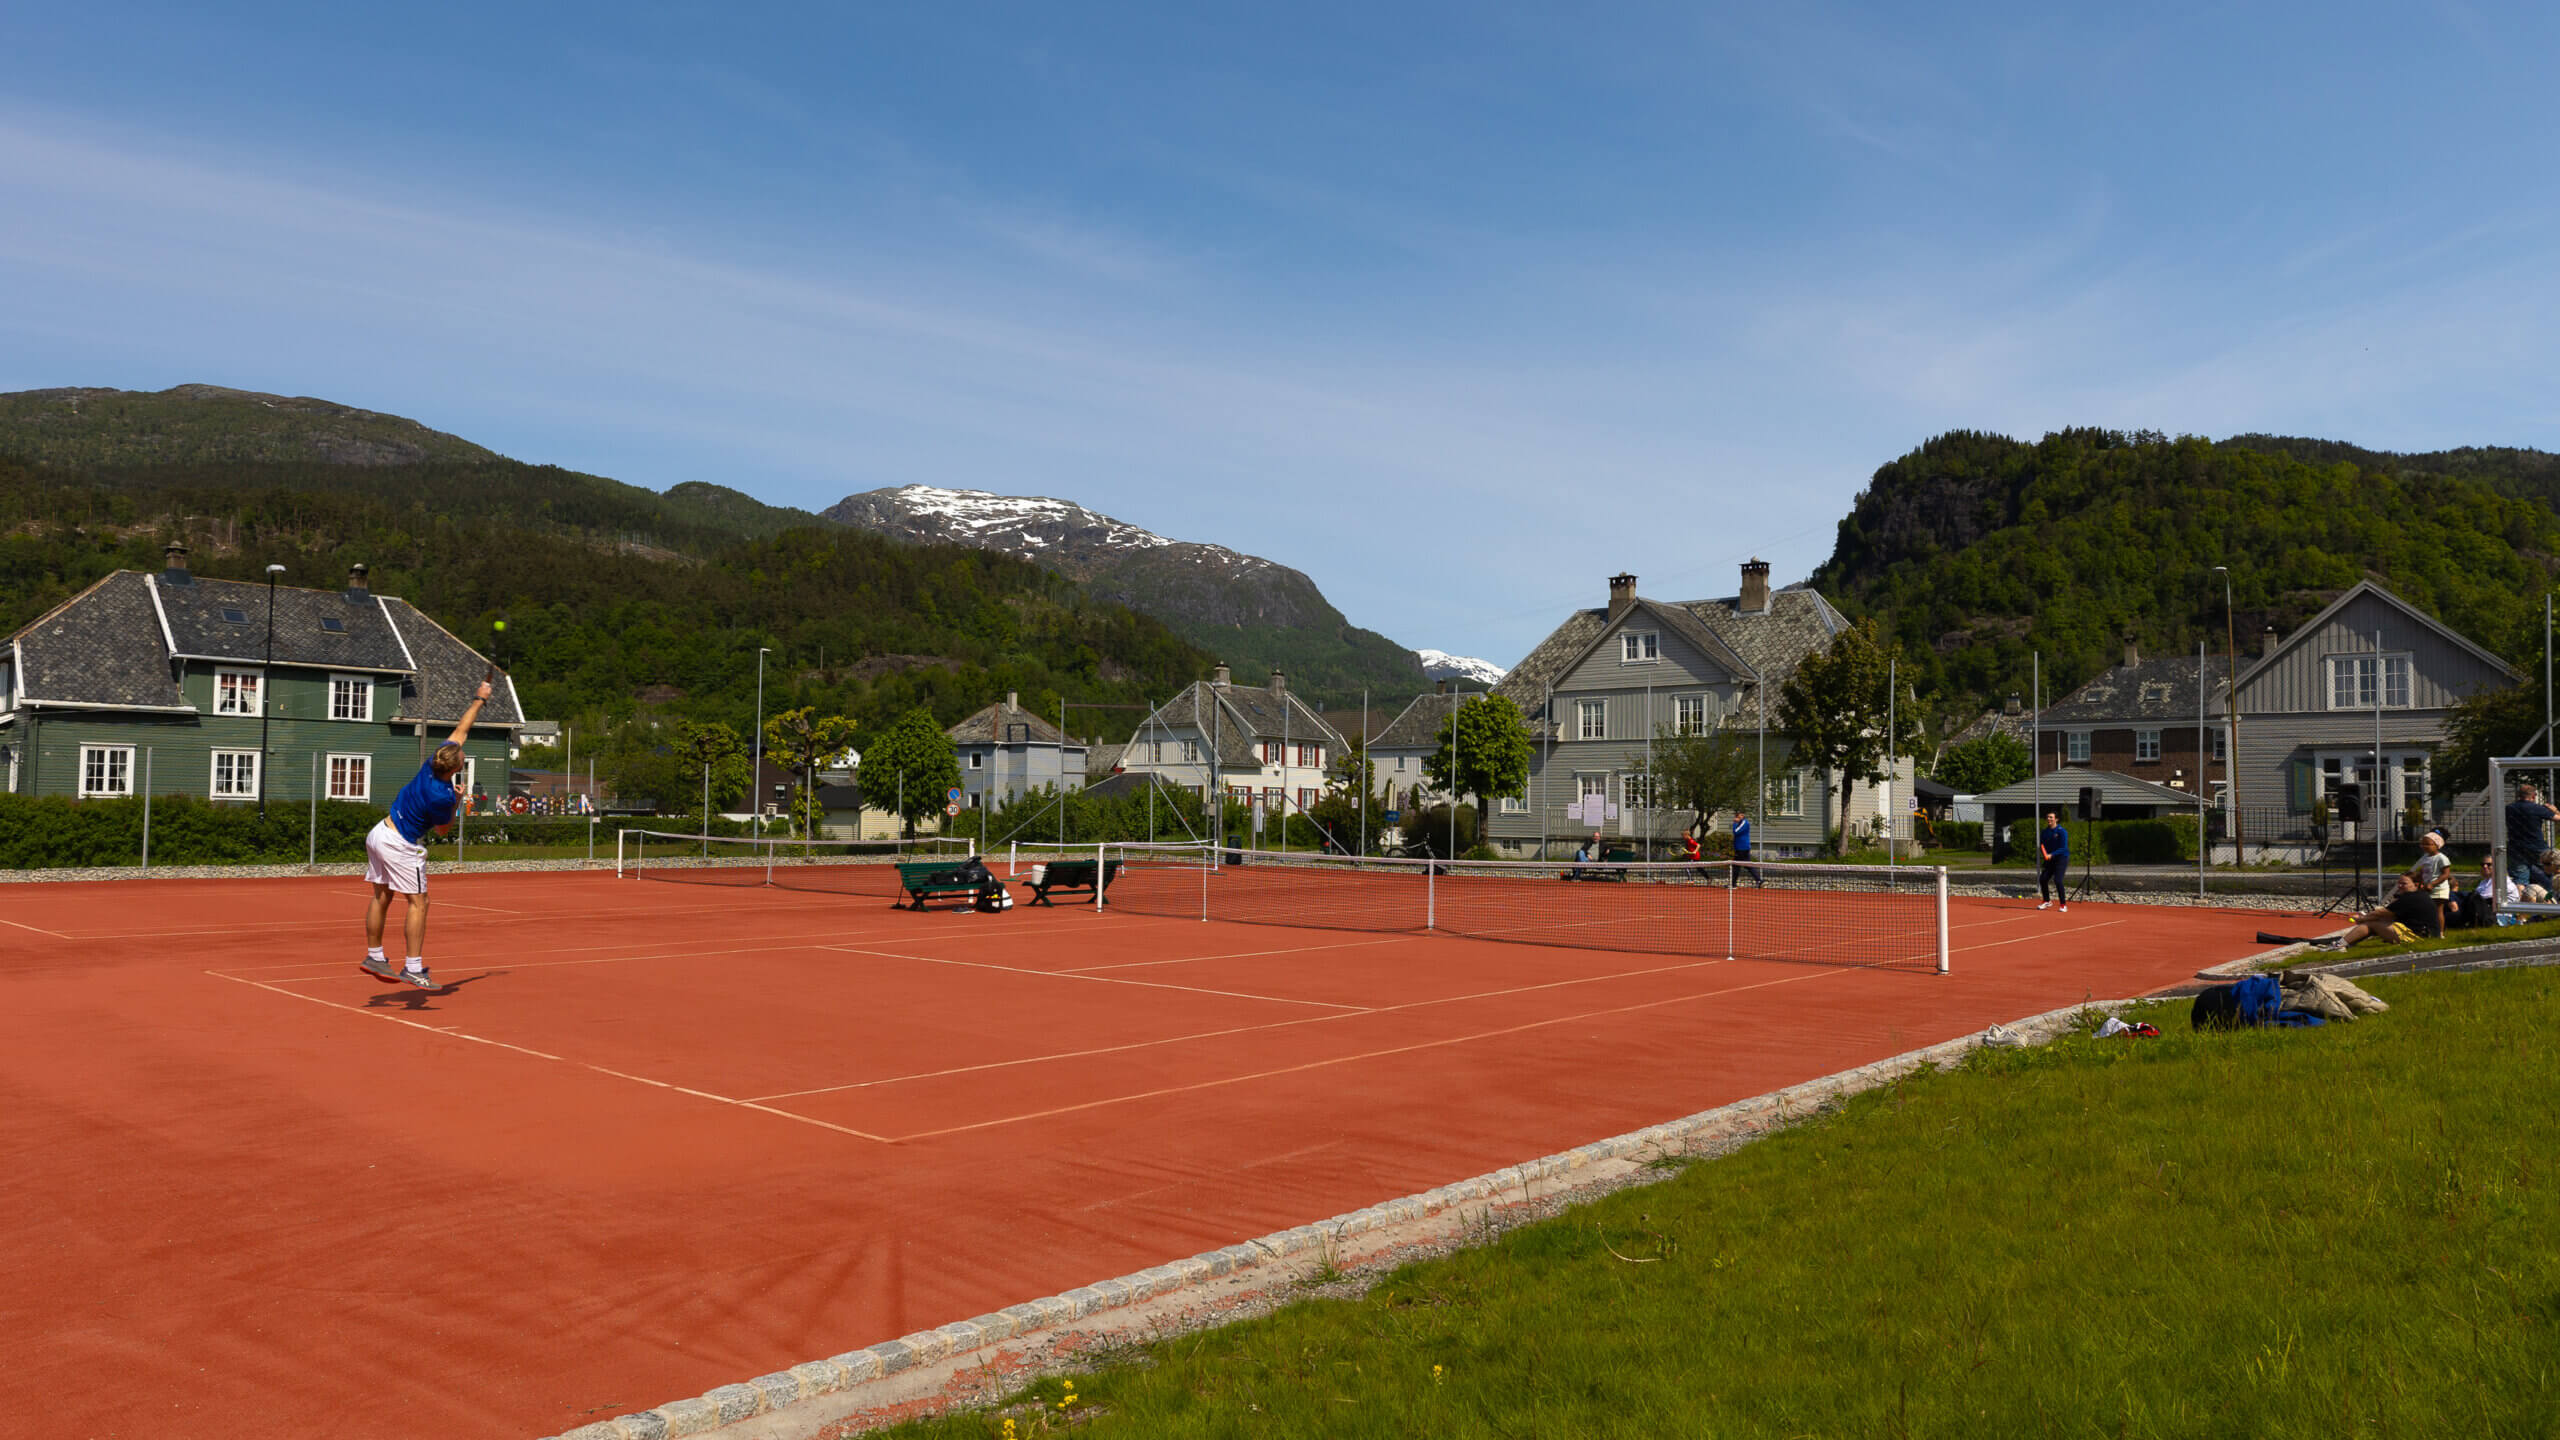 People playing tennis on a tenniscourt in Sauda in summer.